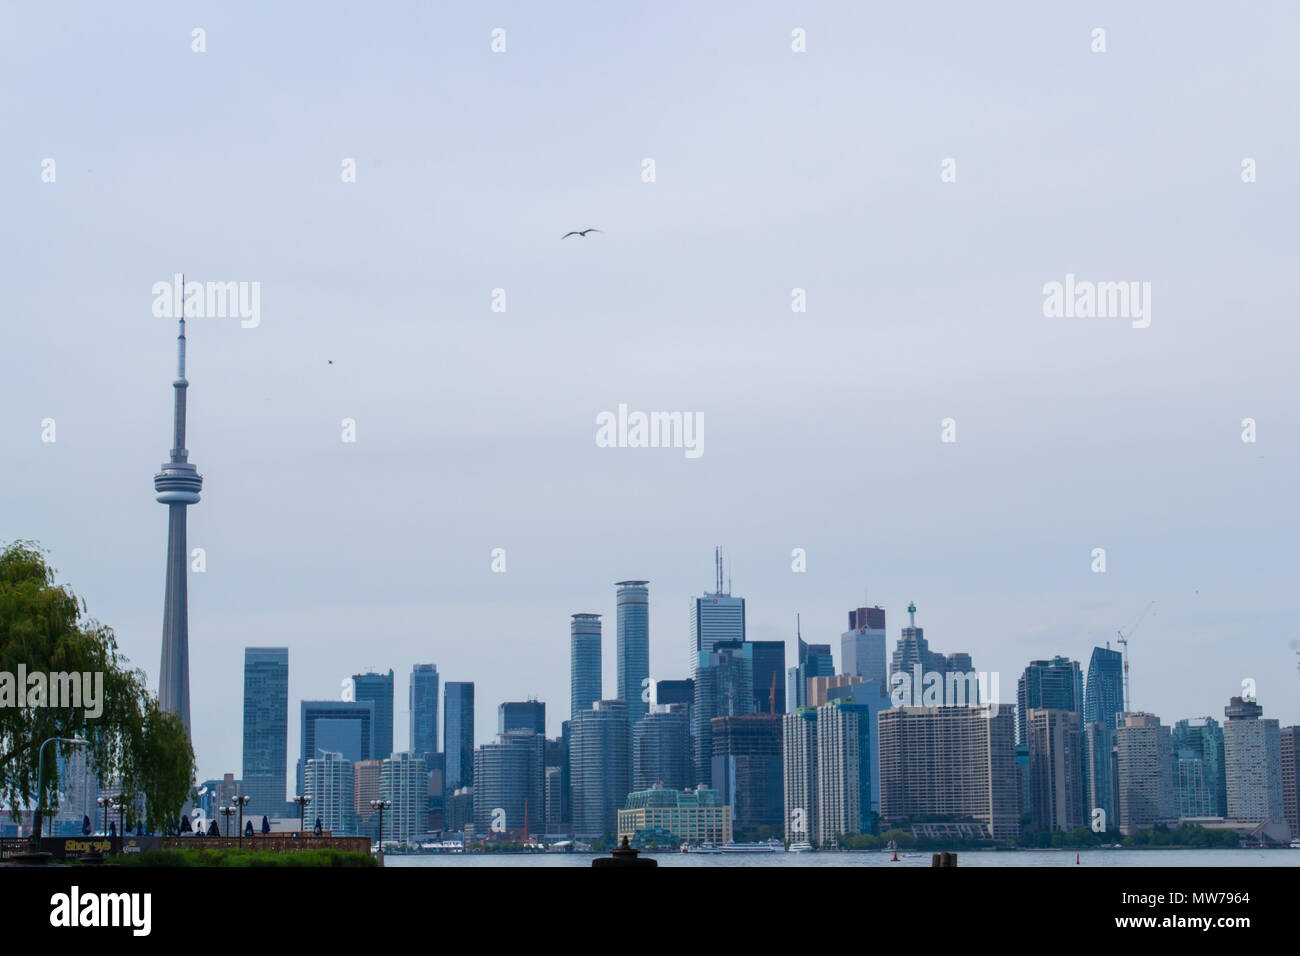 Explore city life and city vibe in Toronto Canada. From city markets to historic brick buildings, walk the districts of this urban city. Stock Photo